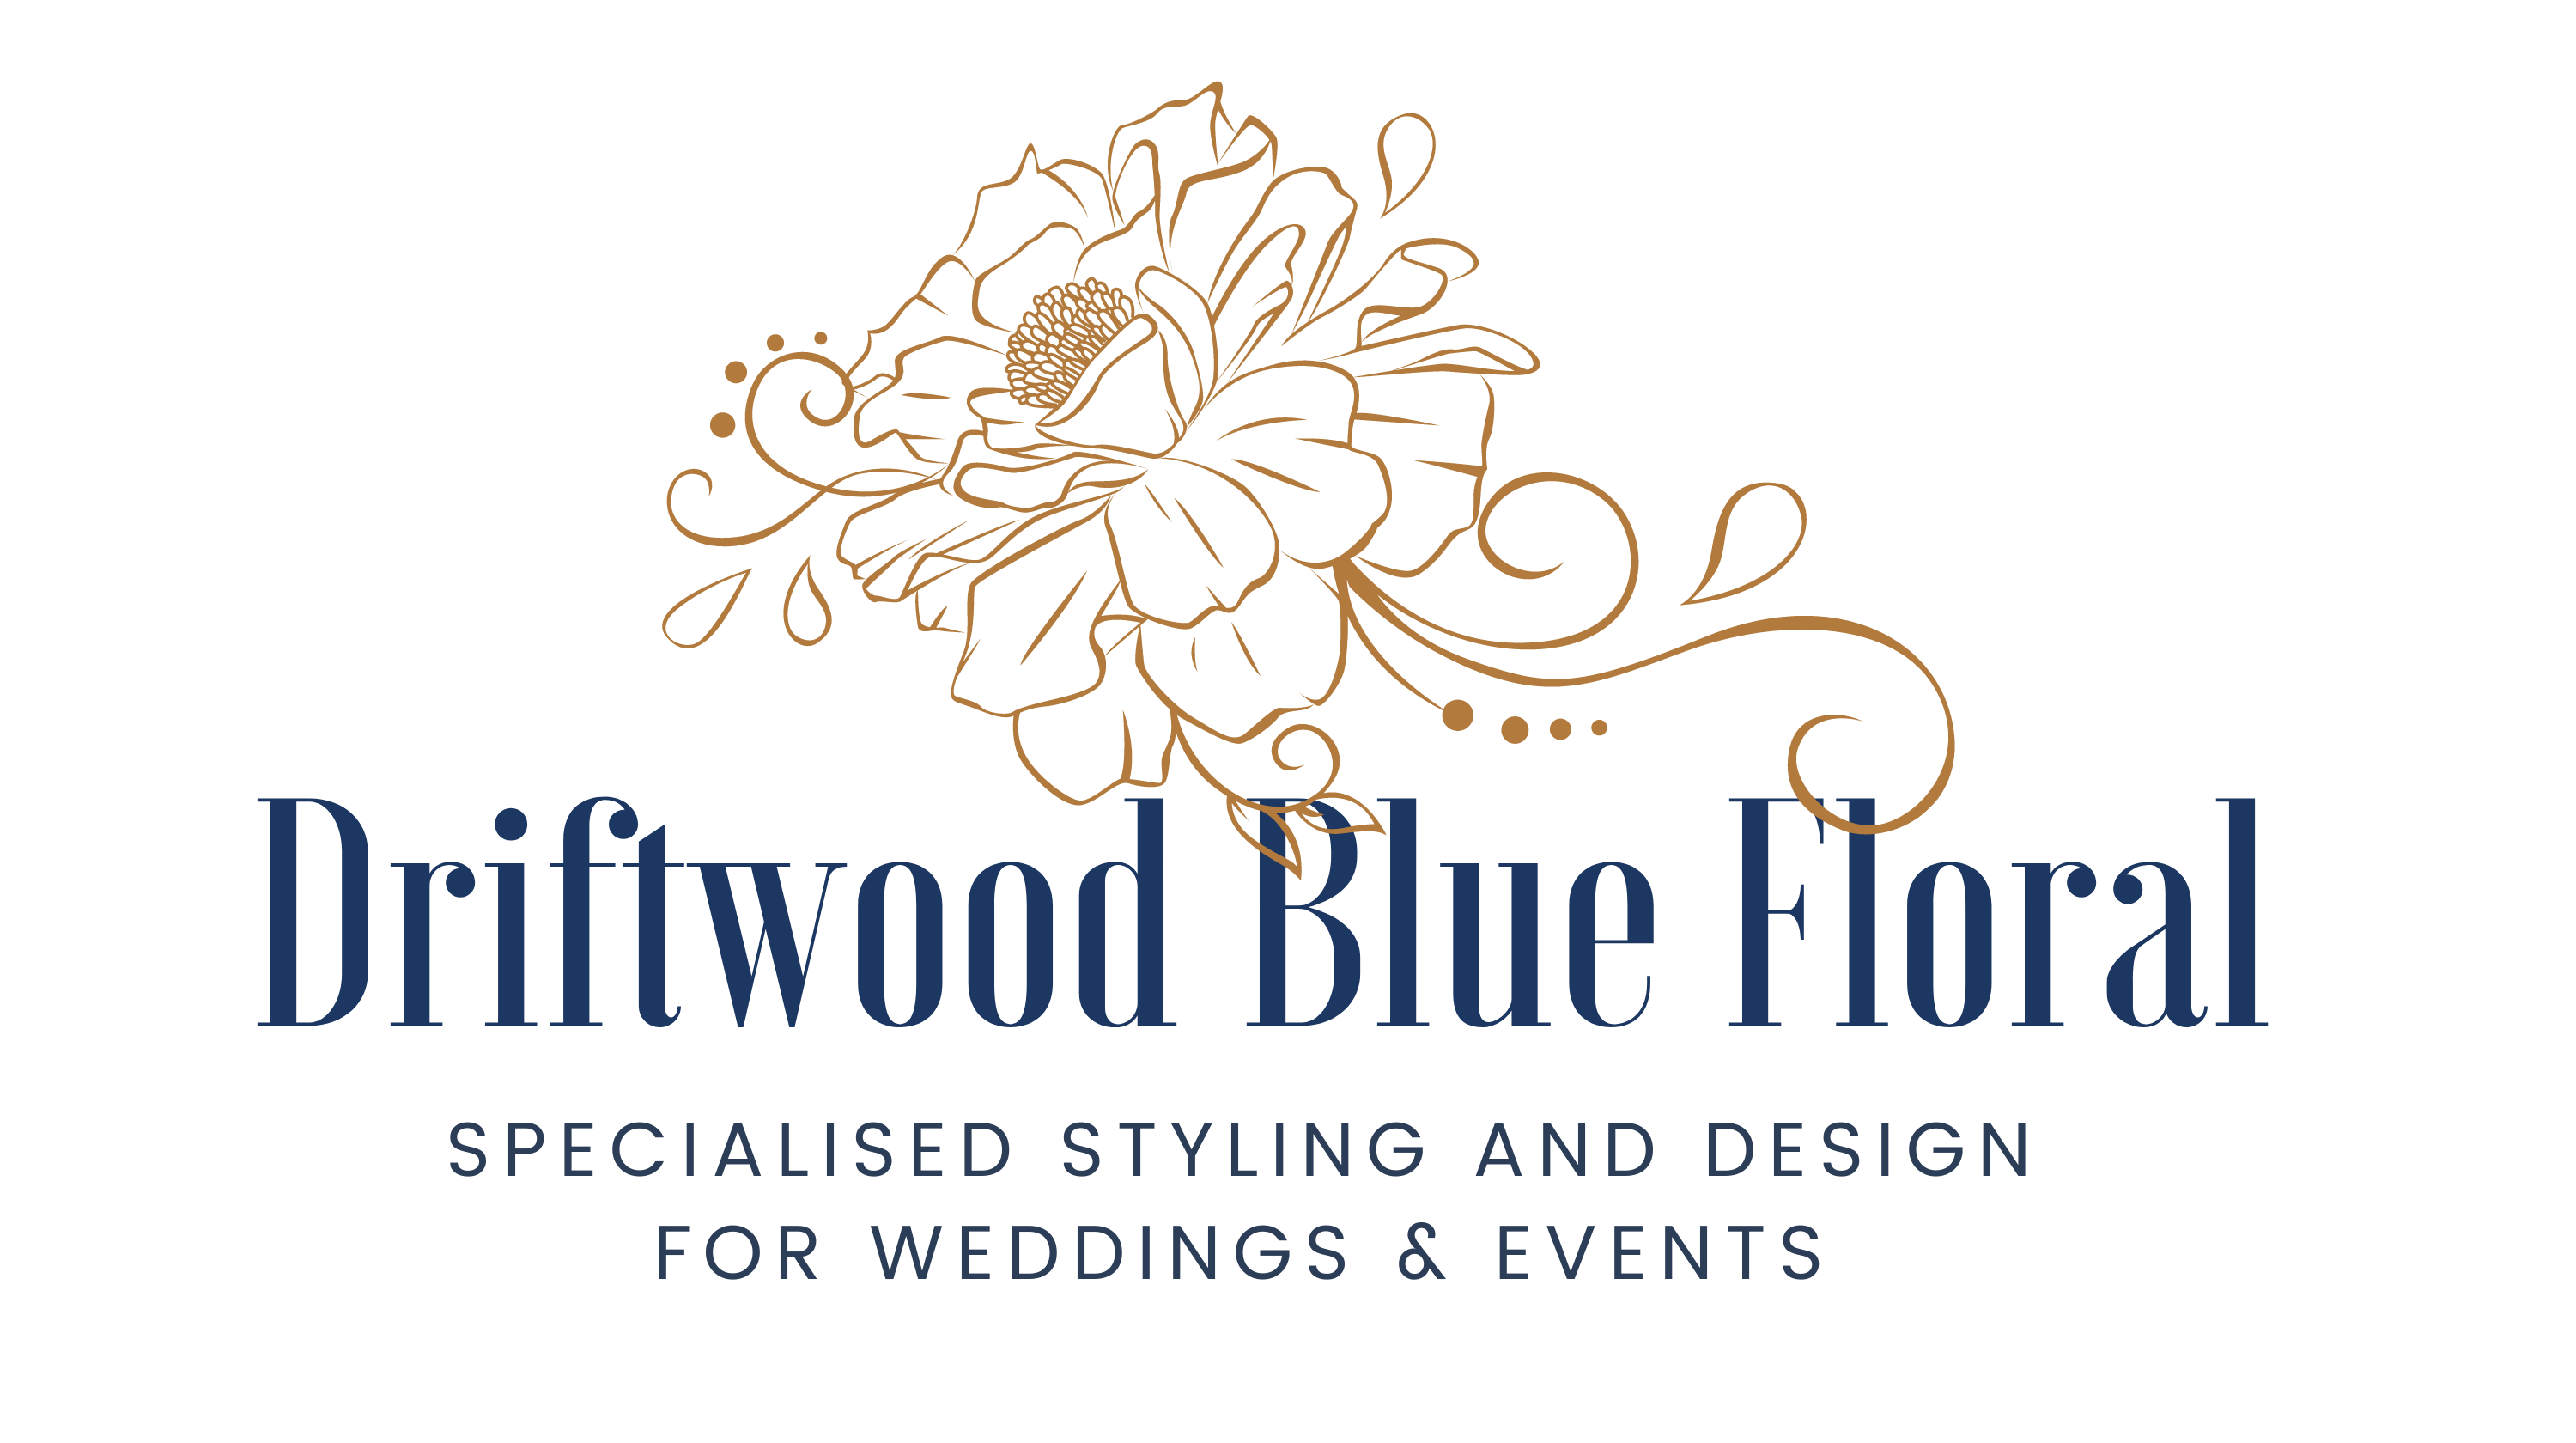 Driftwood Blue Floral logo with blue words and a graphic floral design describing their role as wedding stylist and event stylist